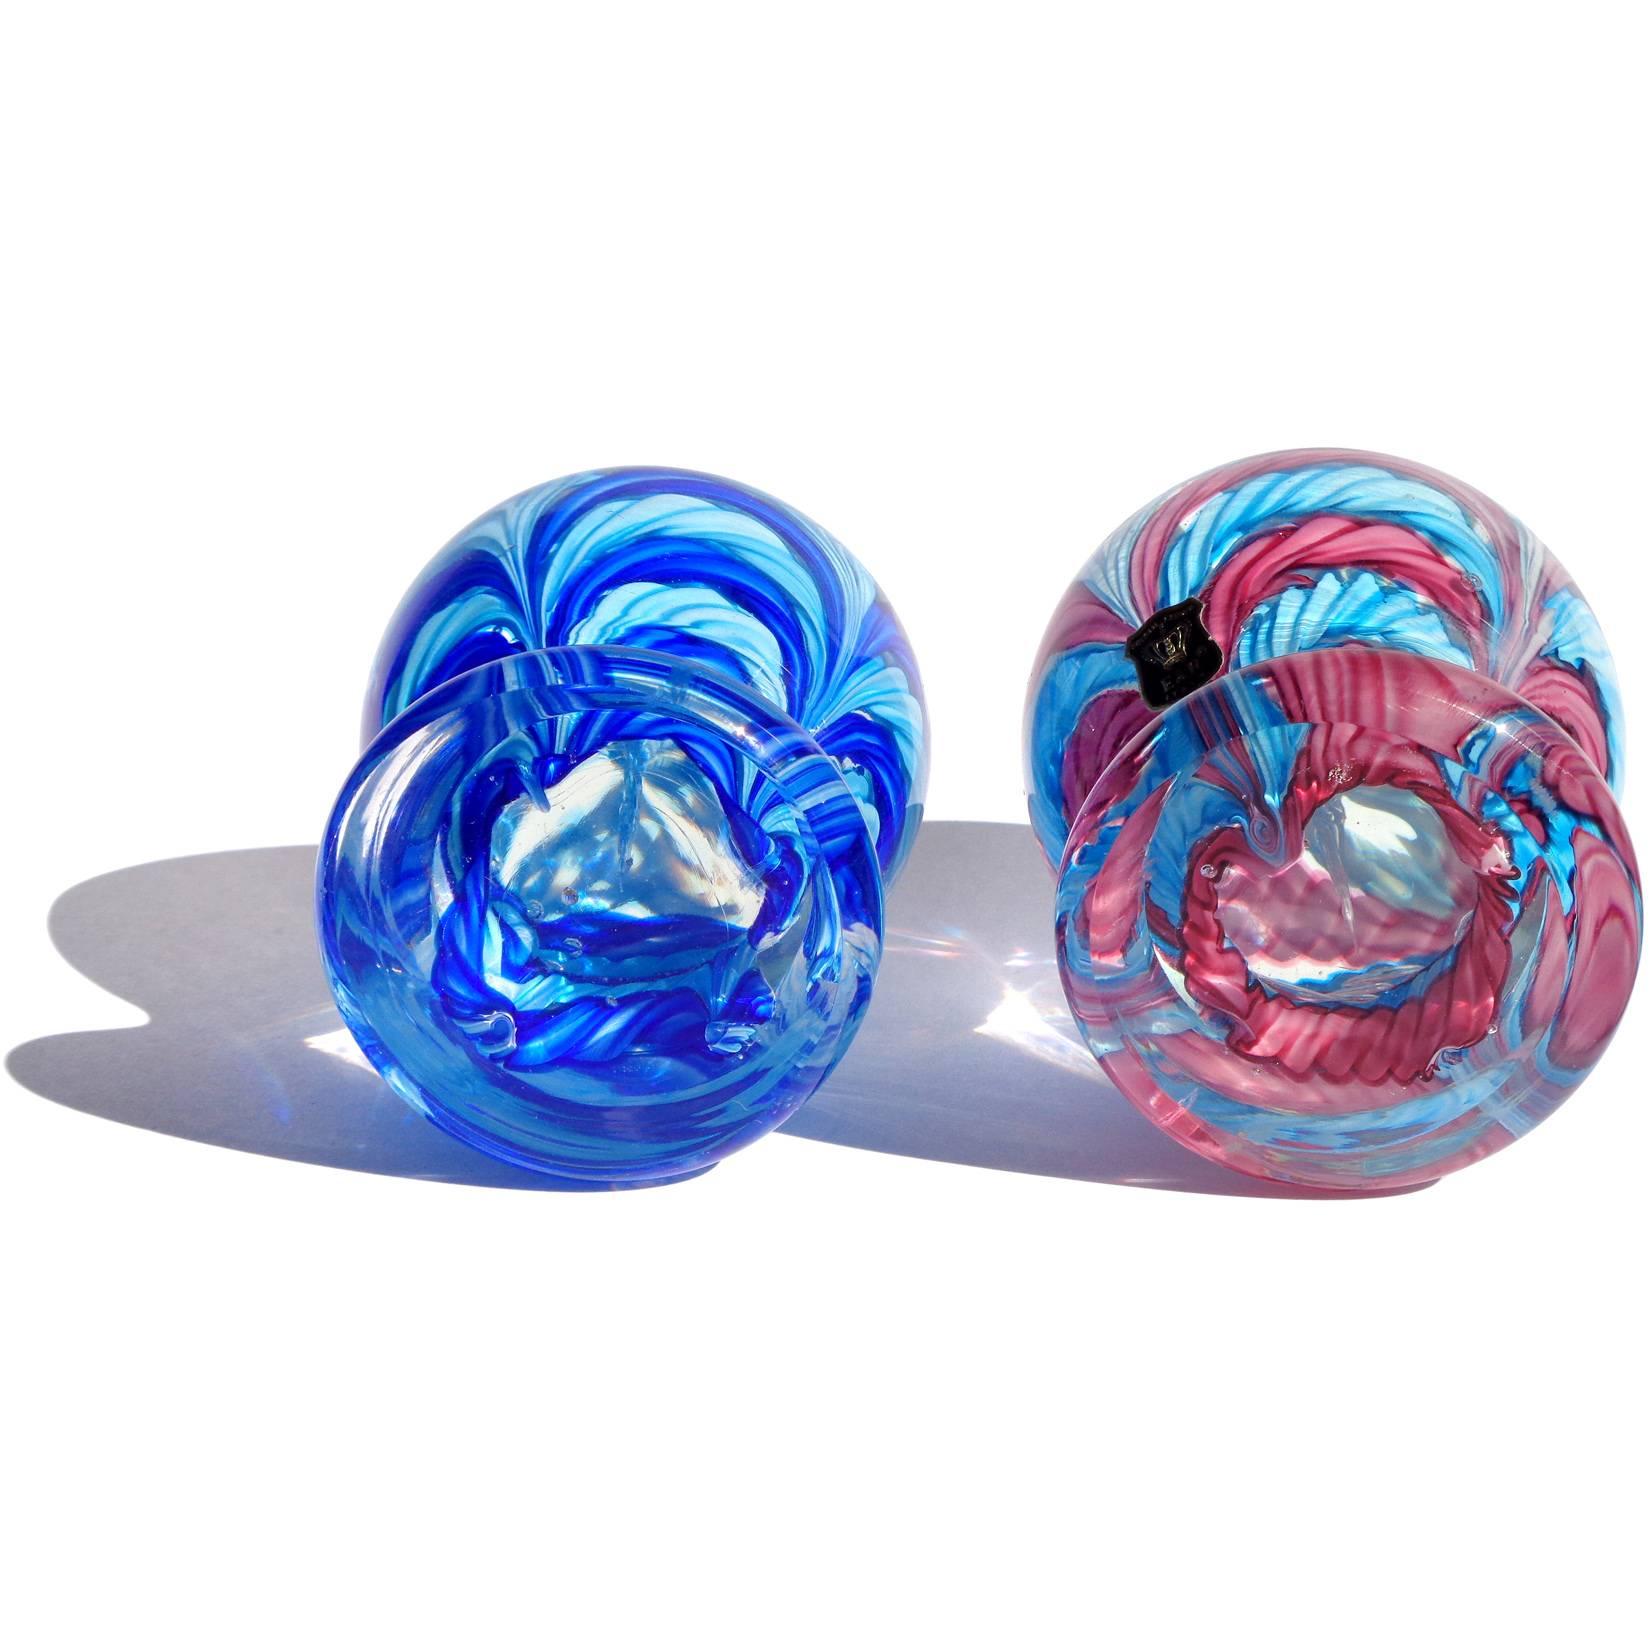 Mid-Century Modern Fratelli Toso Murano Colorful Blue Pink Ribbon Italian Art Glass Paperweights